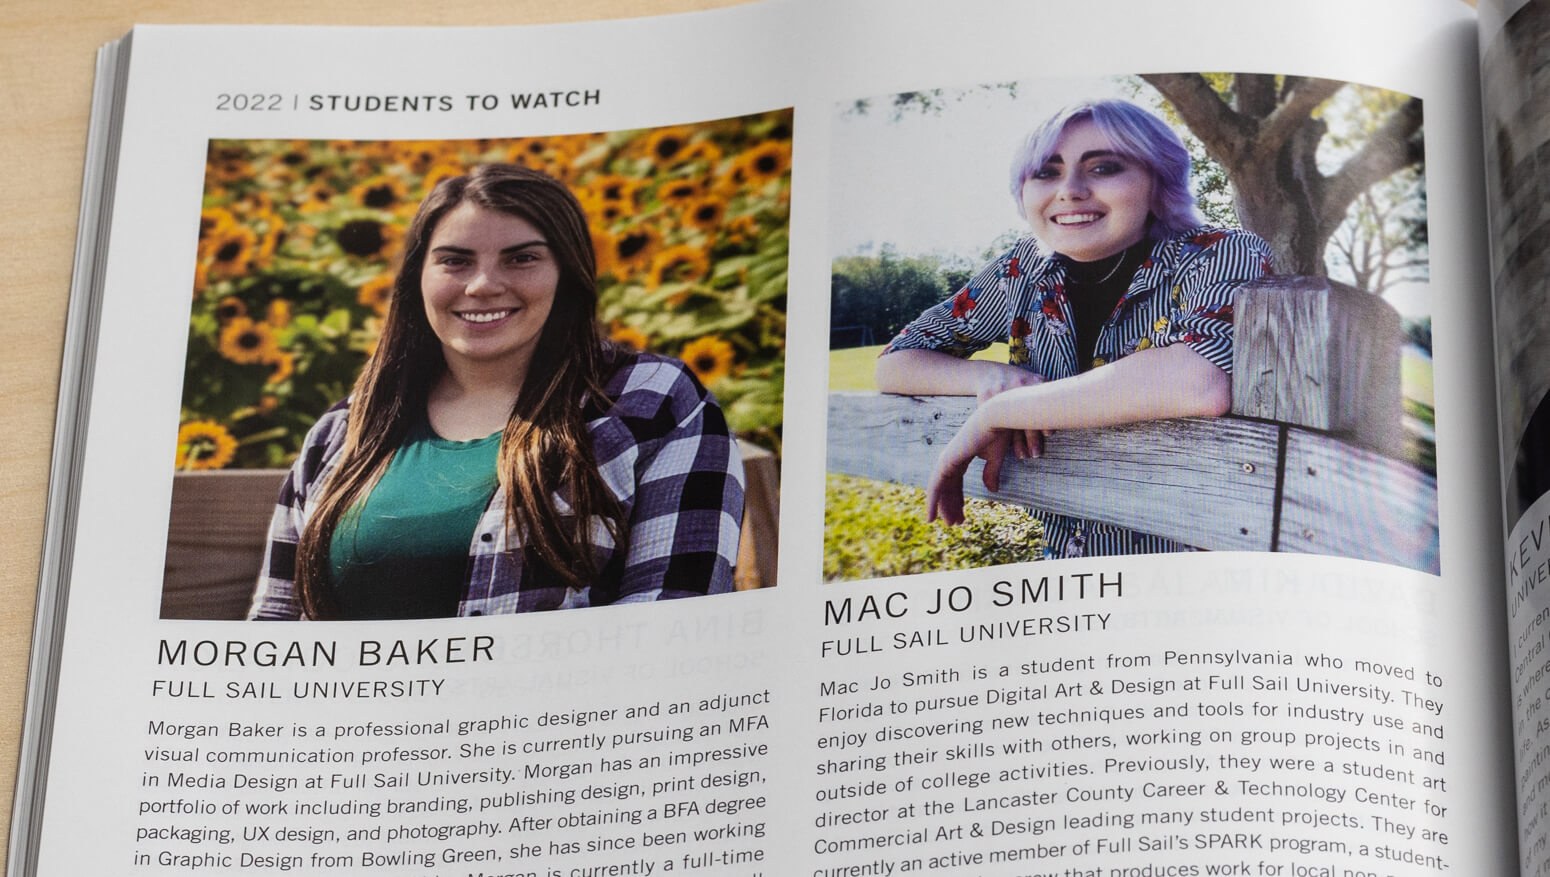 A Graphic Design USA magazine is open to a page featuring two smiling Full Sail students, Morgan Baker and Mac Jo Smith. Morgan Baker has long brown hair and sits on a bench in front of a wall of sunflowers. Sporting a purple do, Mac Jo Smith leans casually over a wooden fence.